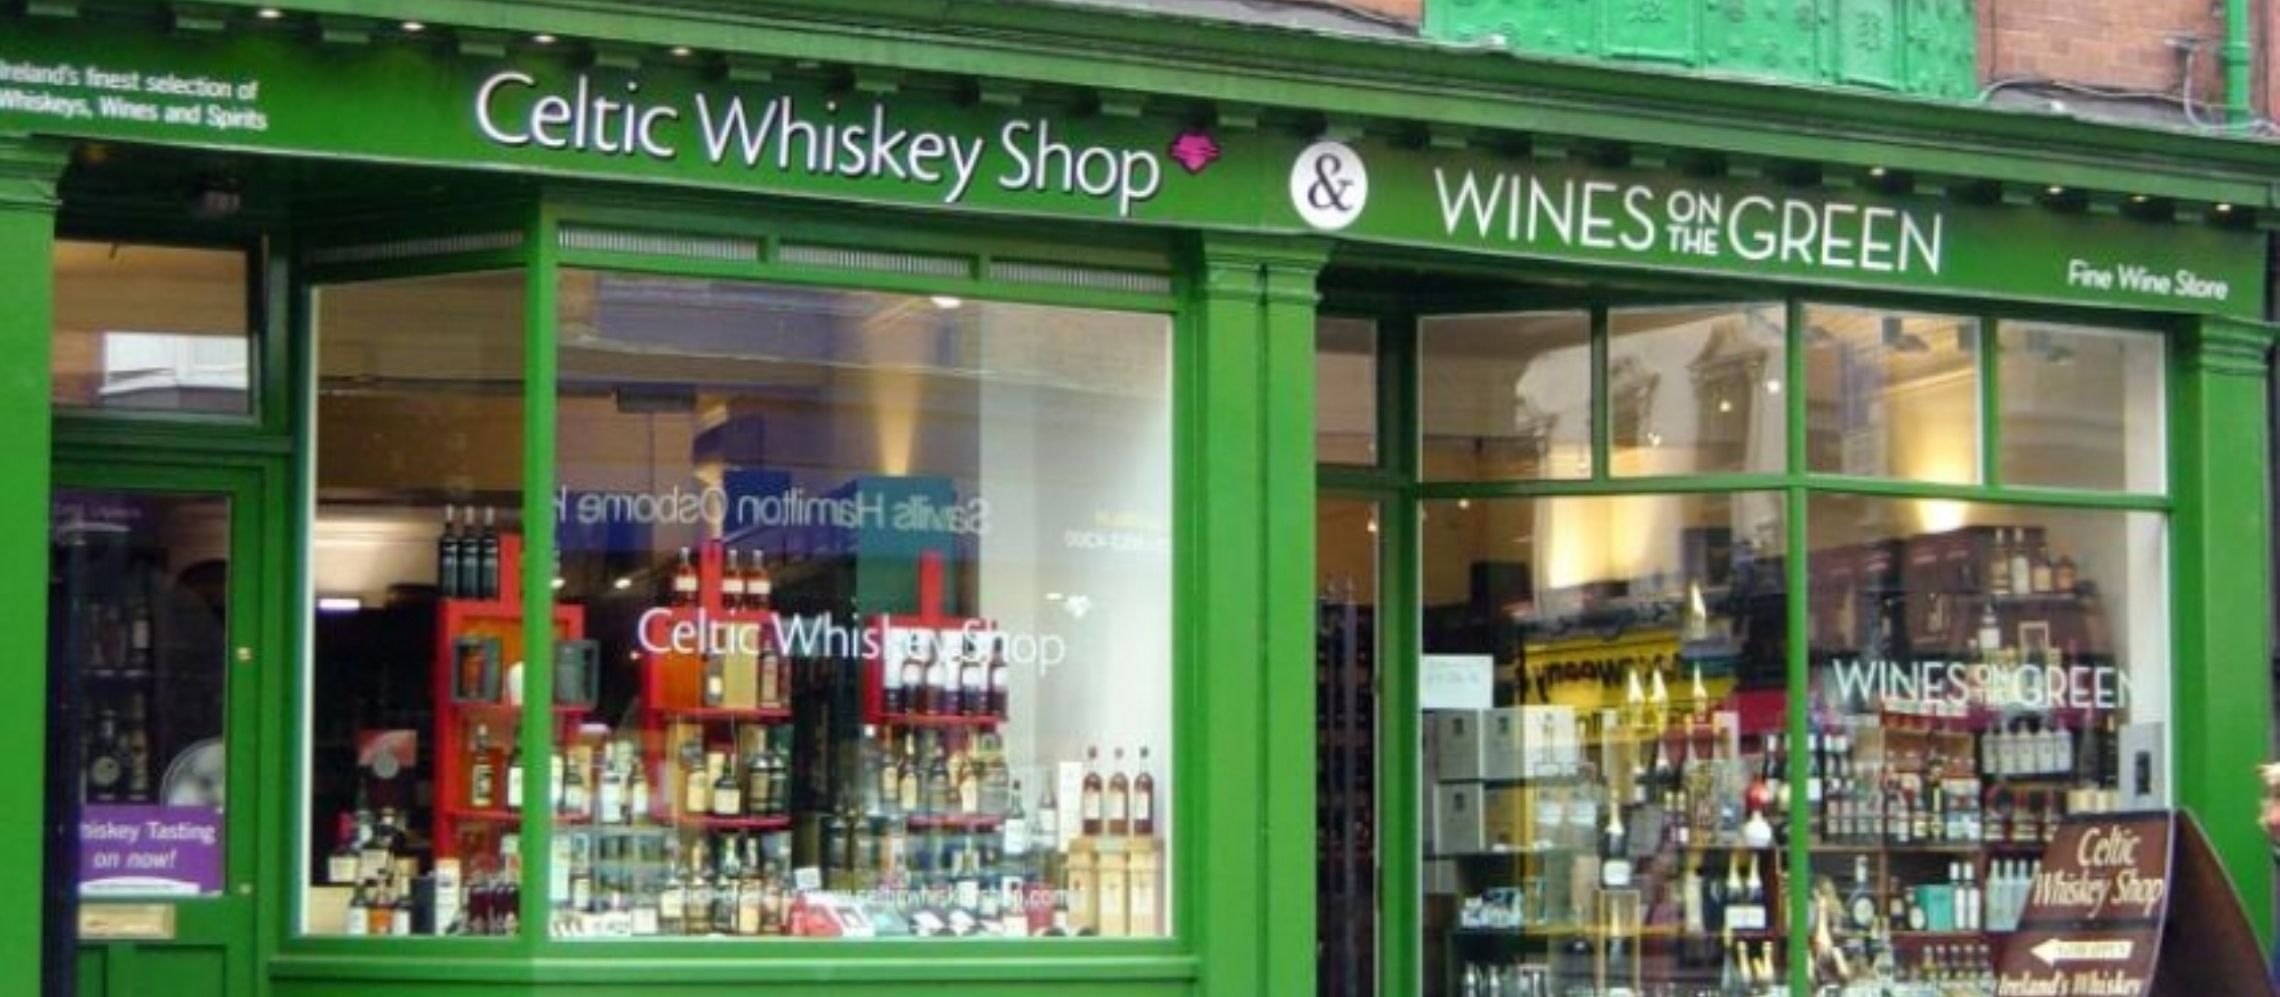 Photo for: Leading Spirits Retailers in Ireland